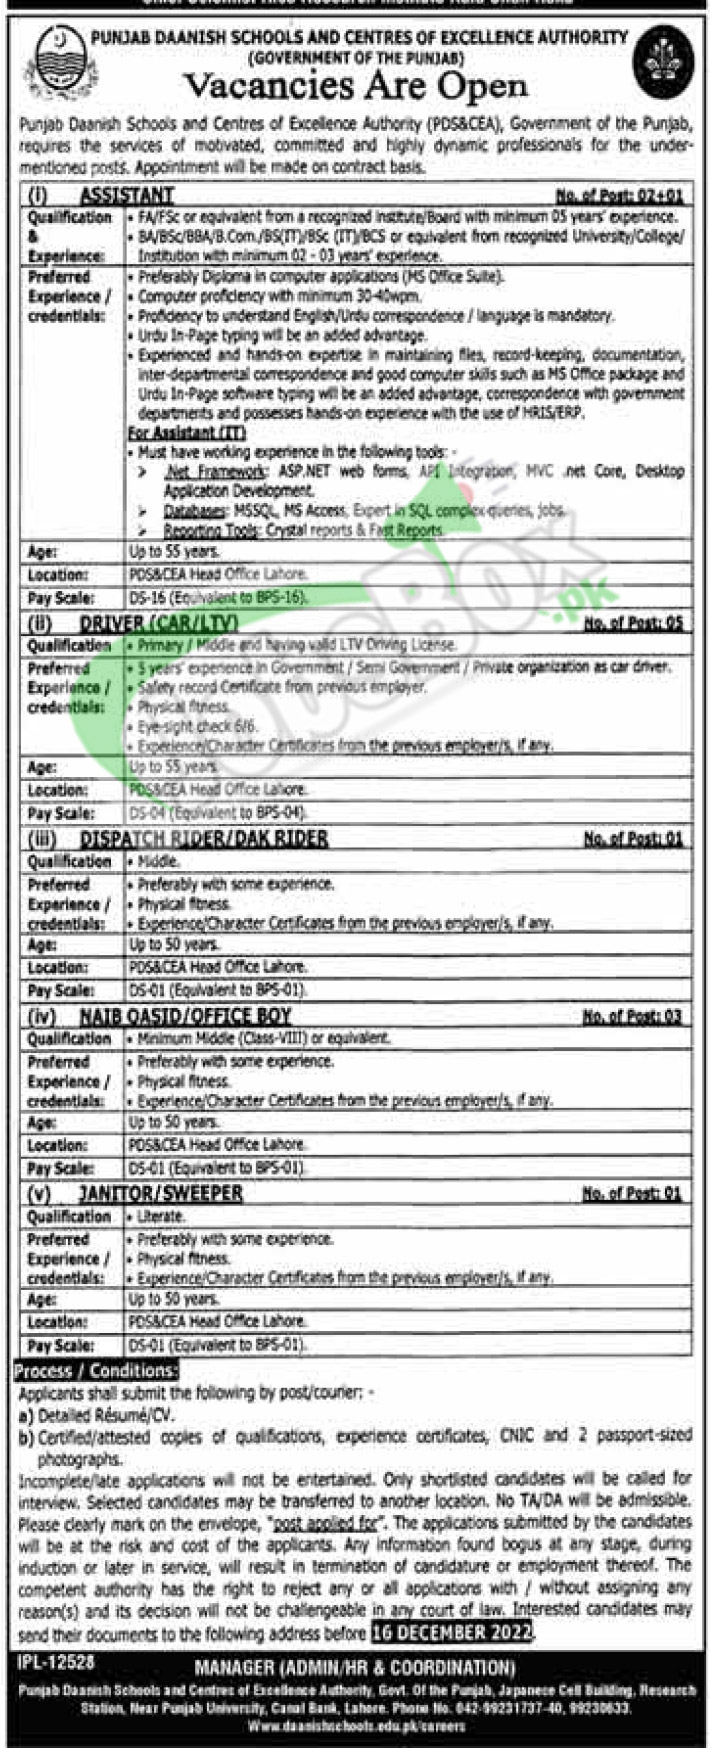 Punjab Daanish Schools & Centers of Excellence Authority Jobs 2022 Latest